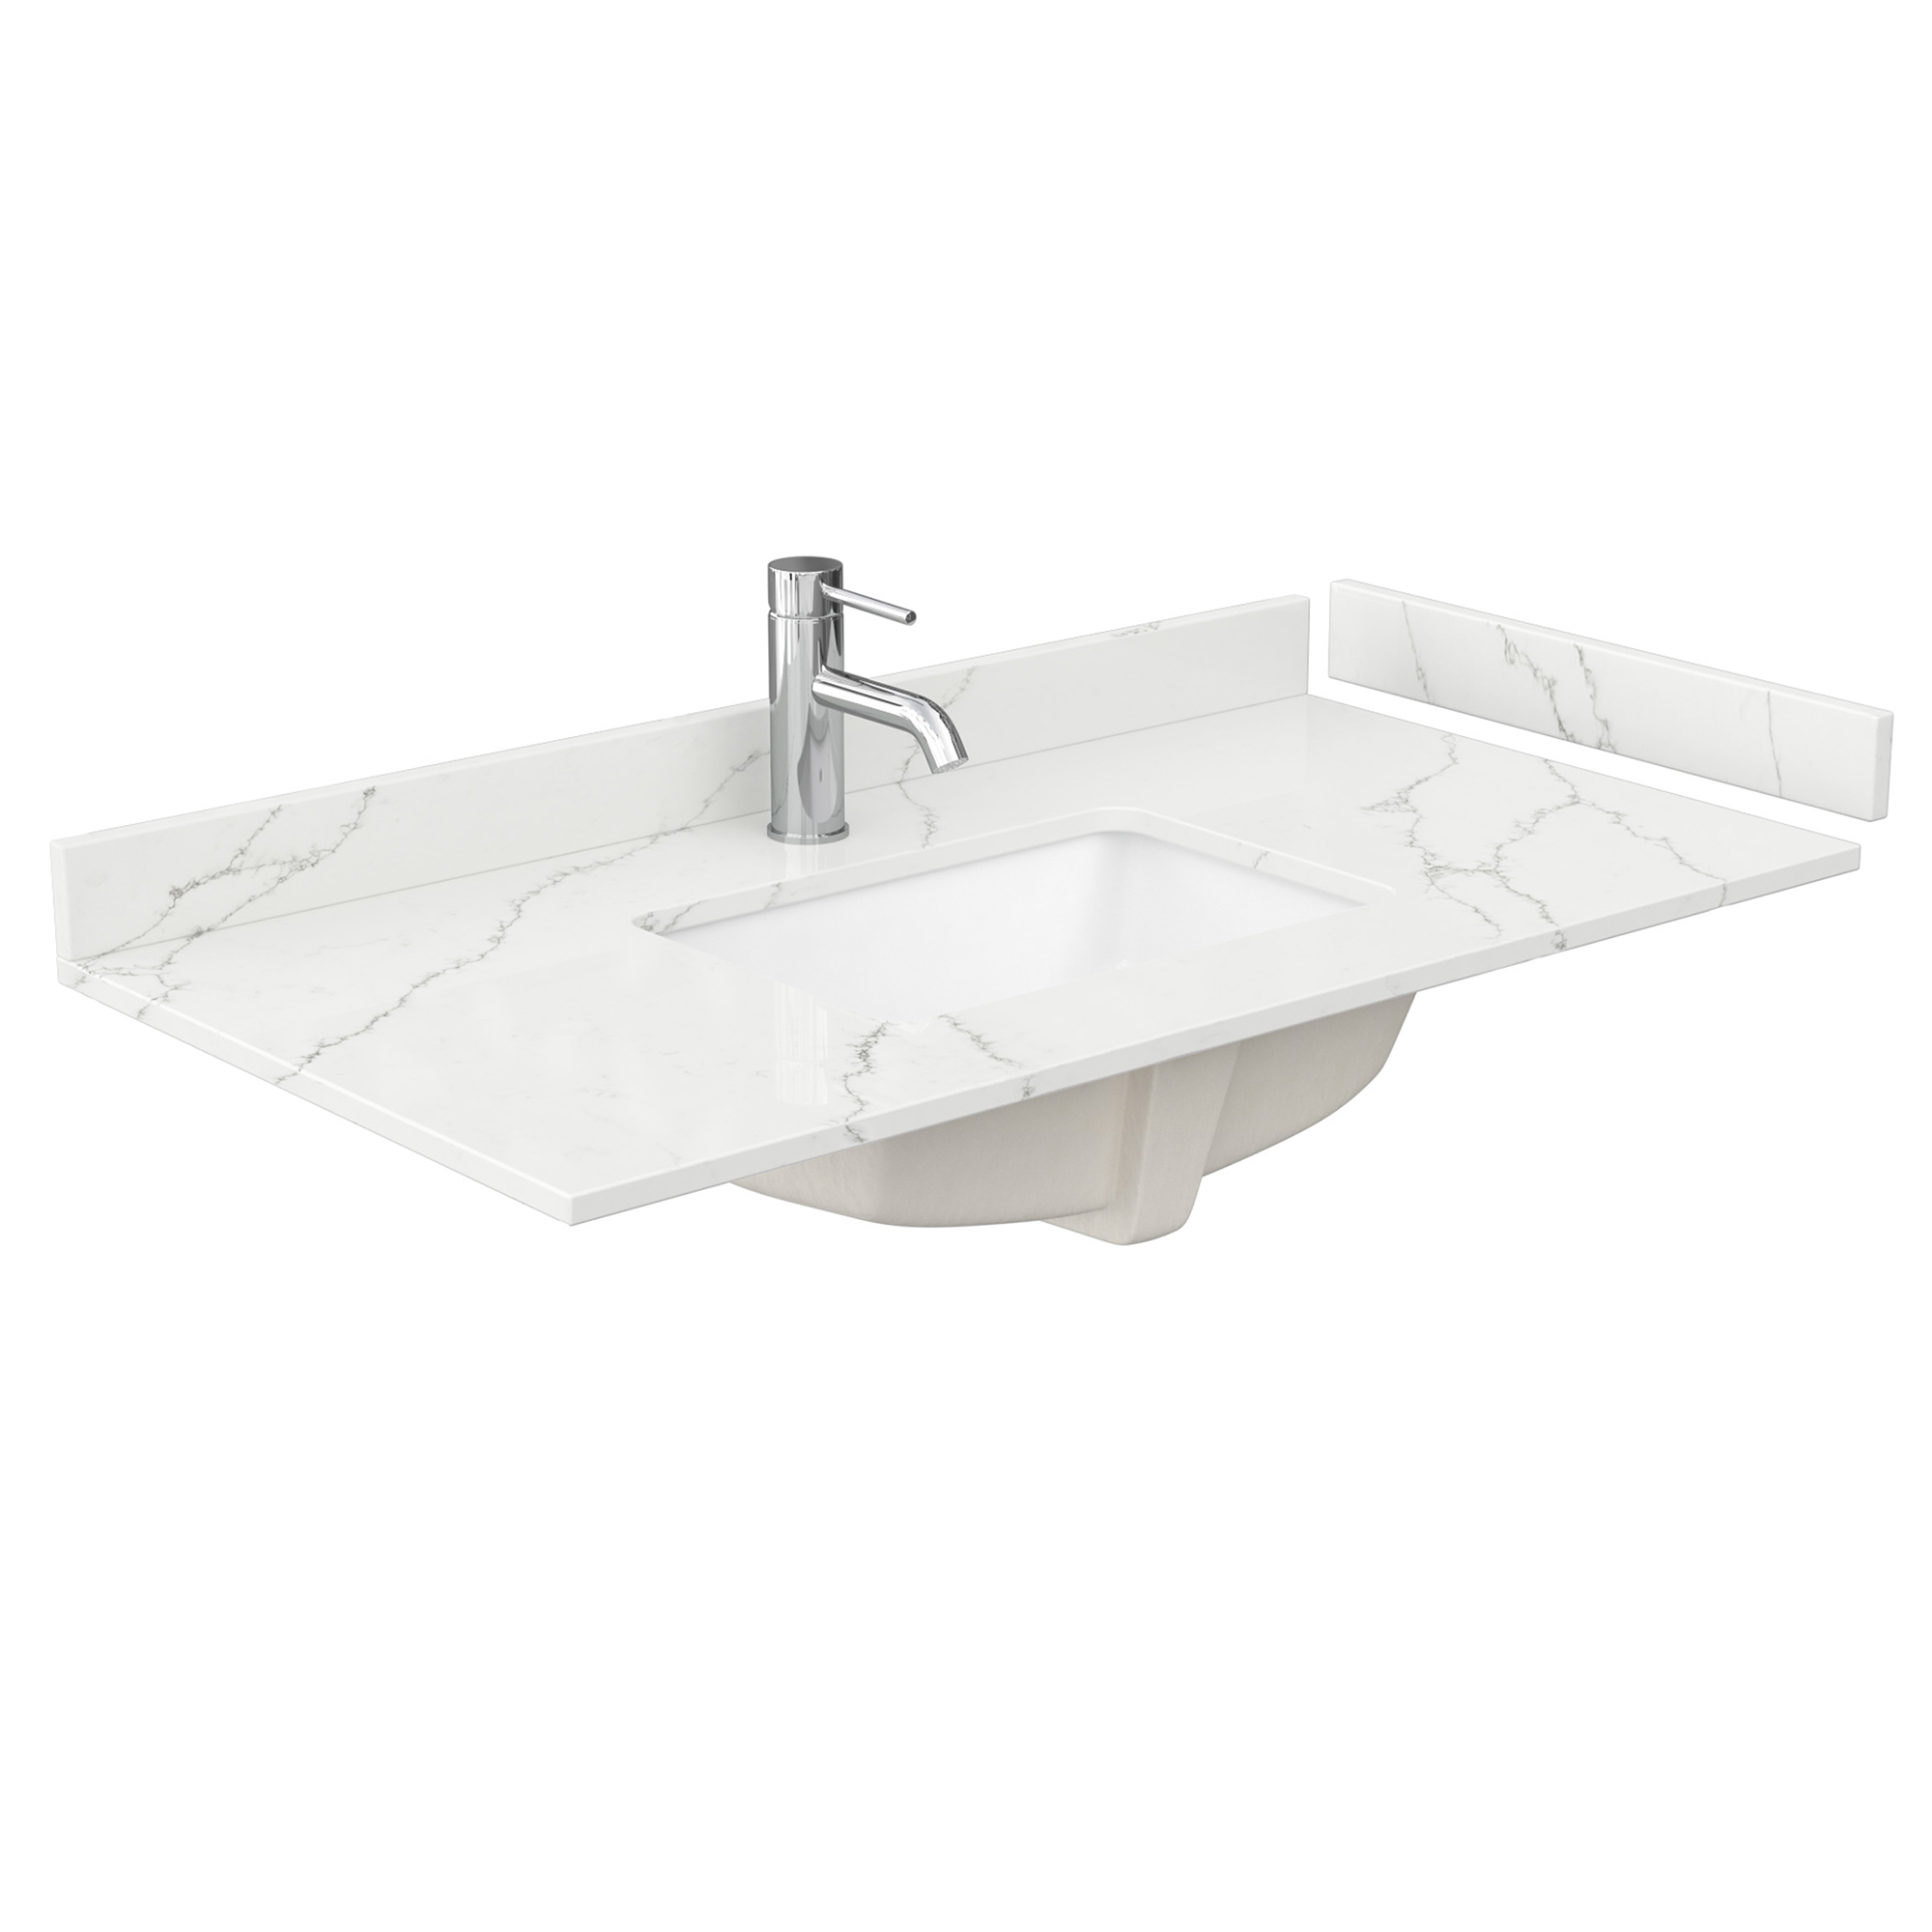 42" Single Countertop - Giotto Quartz (8066) with Undermount Square Sink (1-Hole) - Includes Backsplash and Sidesplash WCFQC142STOPUNSGT